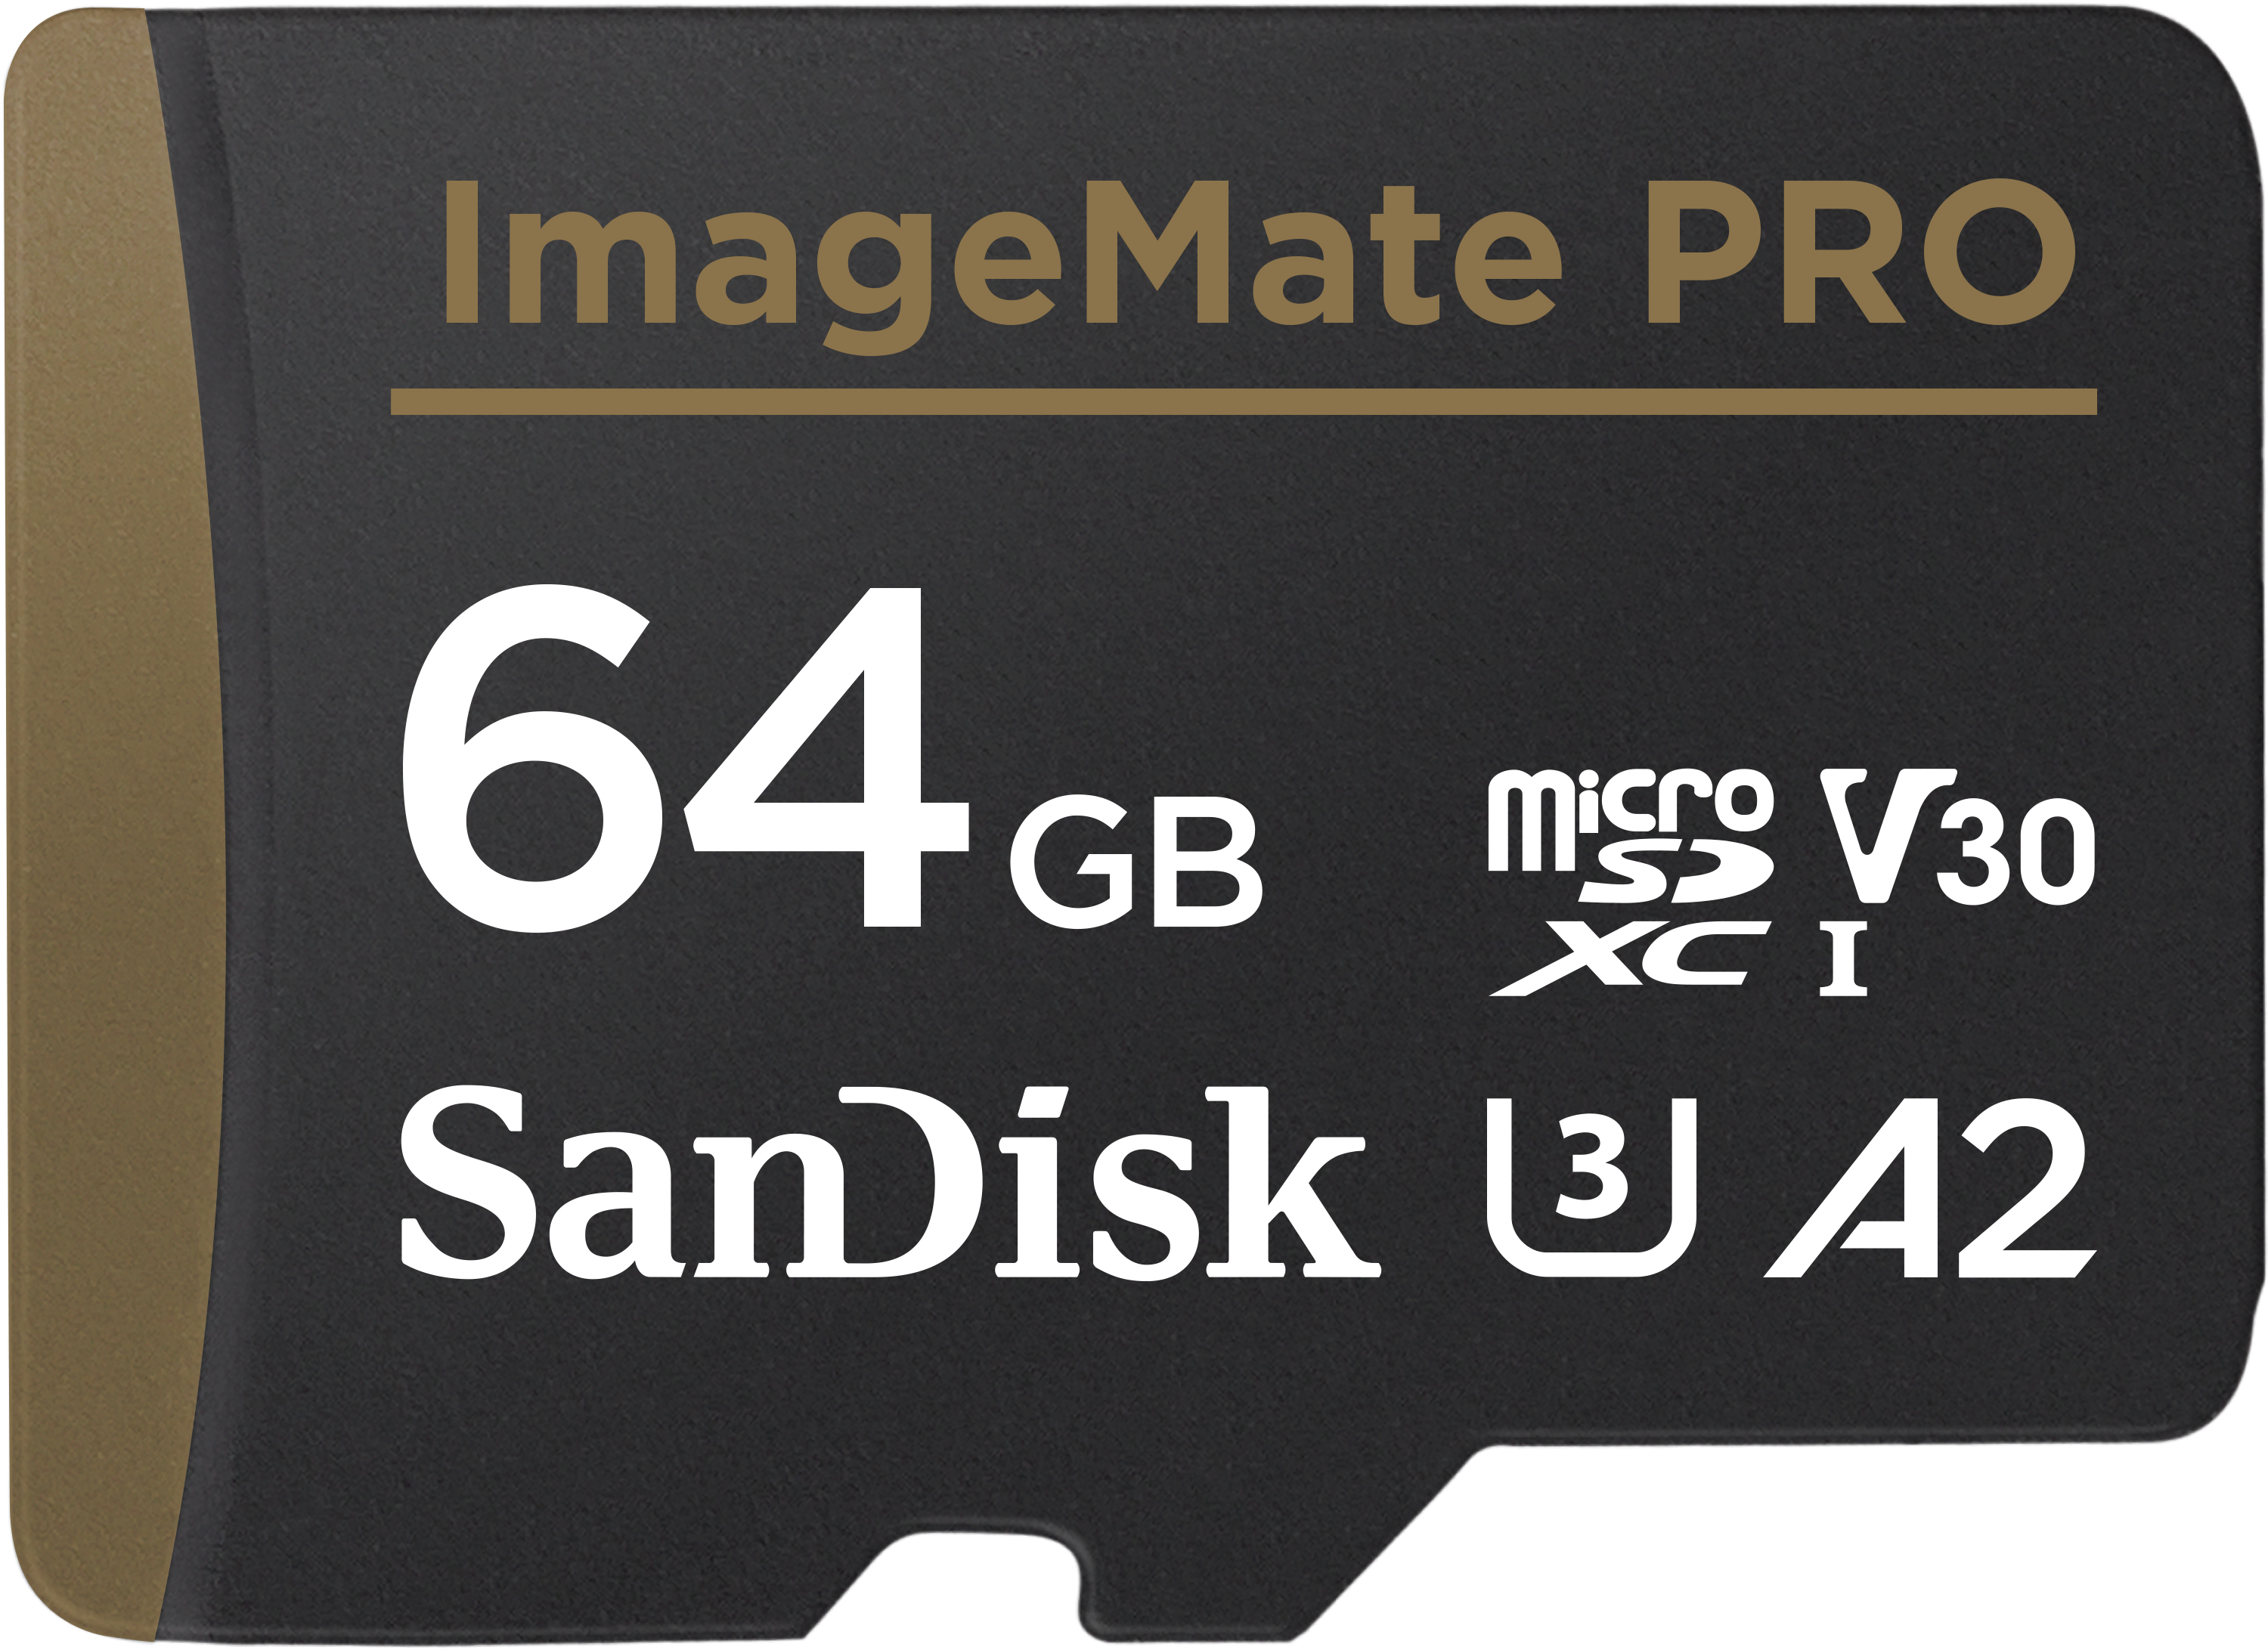 100MBs A1 U1 Works with SanDisk SanDisk Ultra 200GB MicroSDXC Verified for Samsung Galaxy J4 Plus by SanFlash